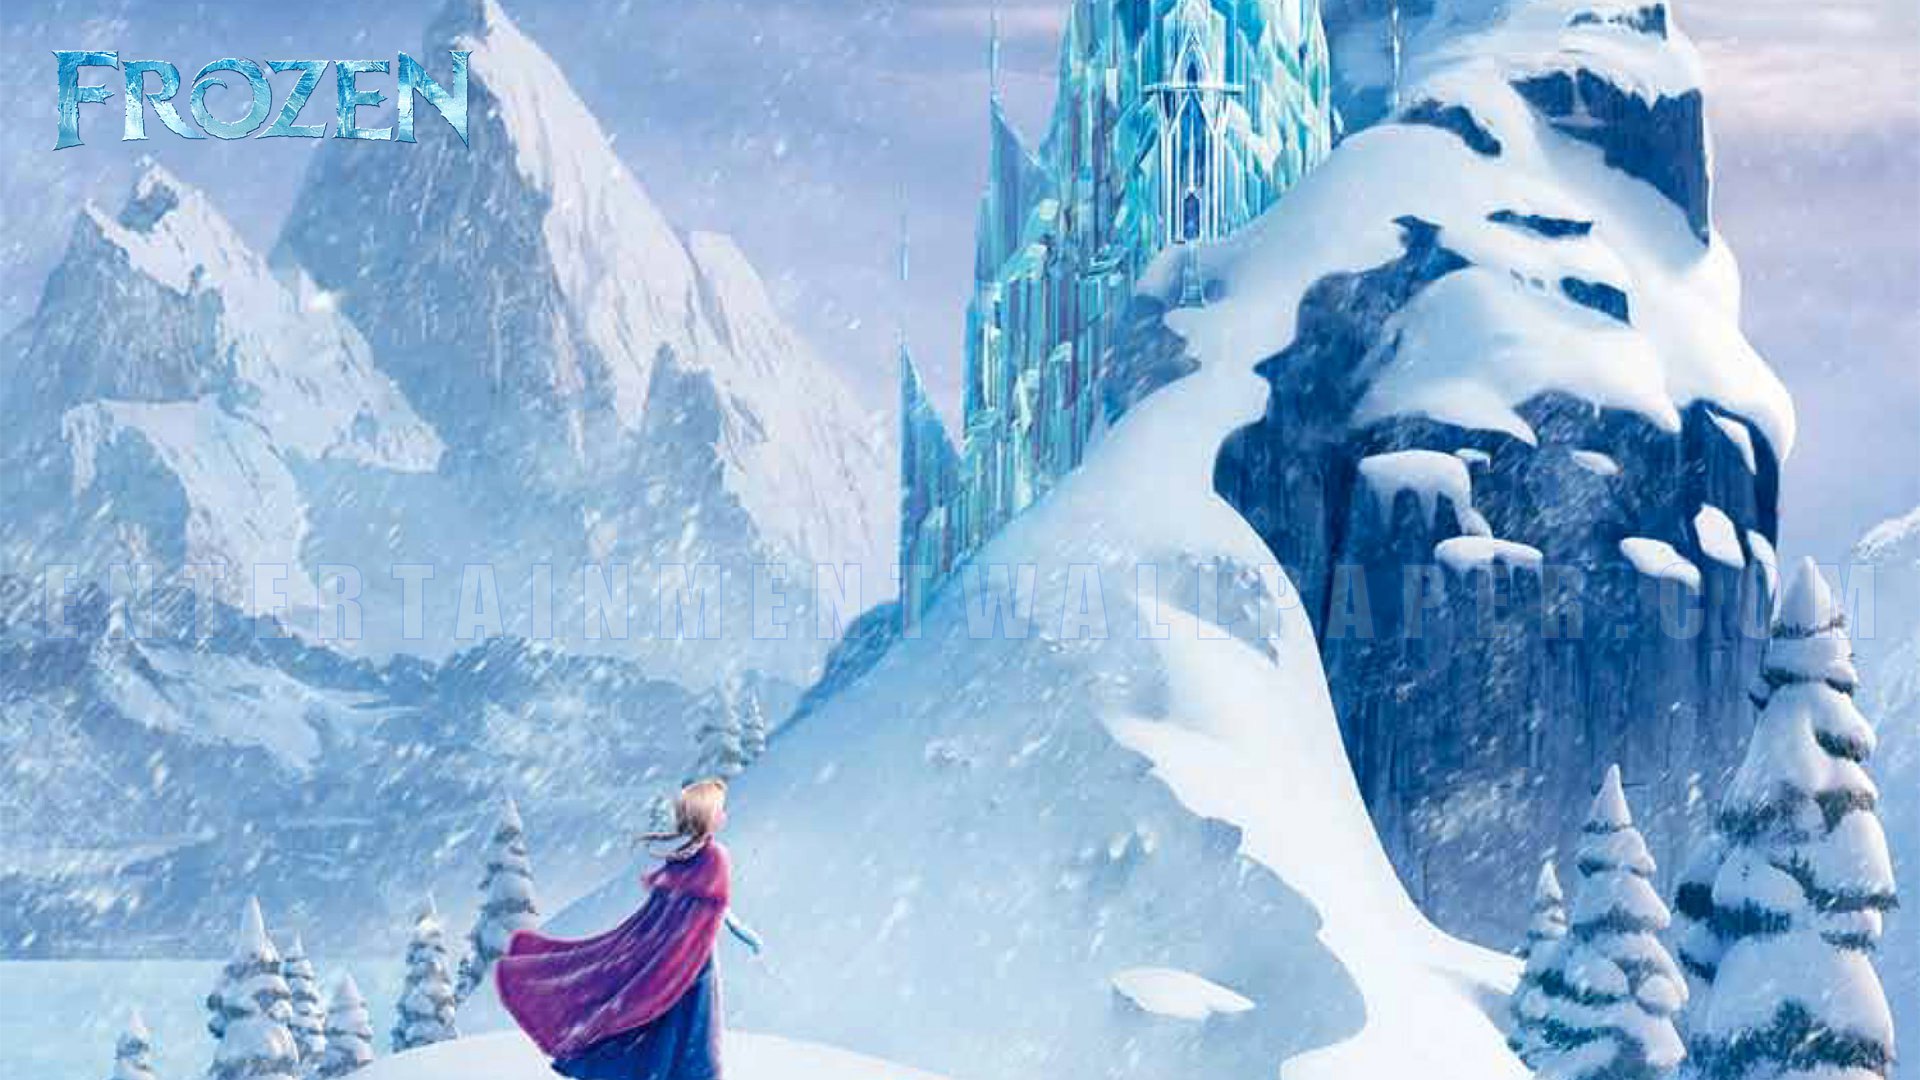 Frozen images Frozen HD wallpaper and background photos 35803754 1920x1080